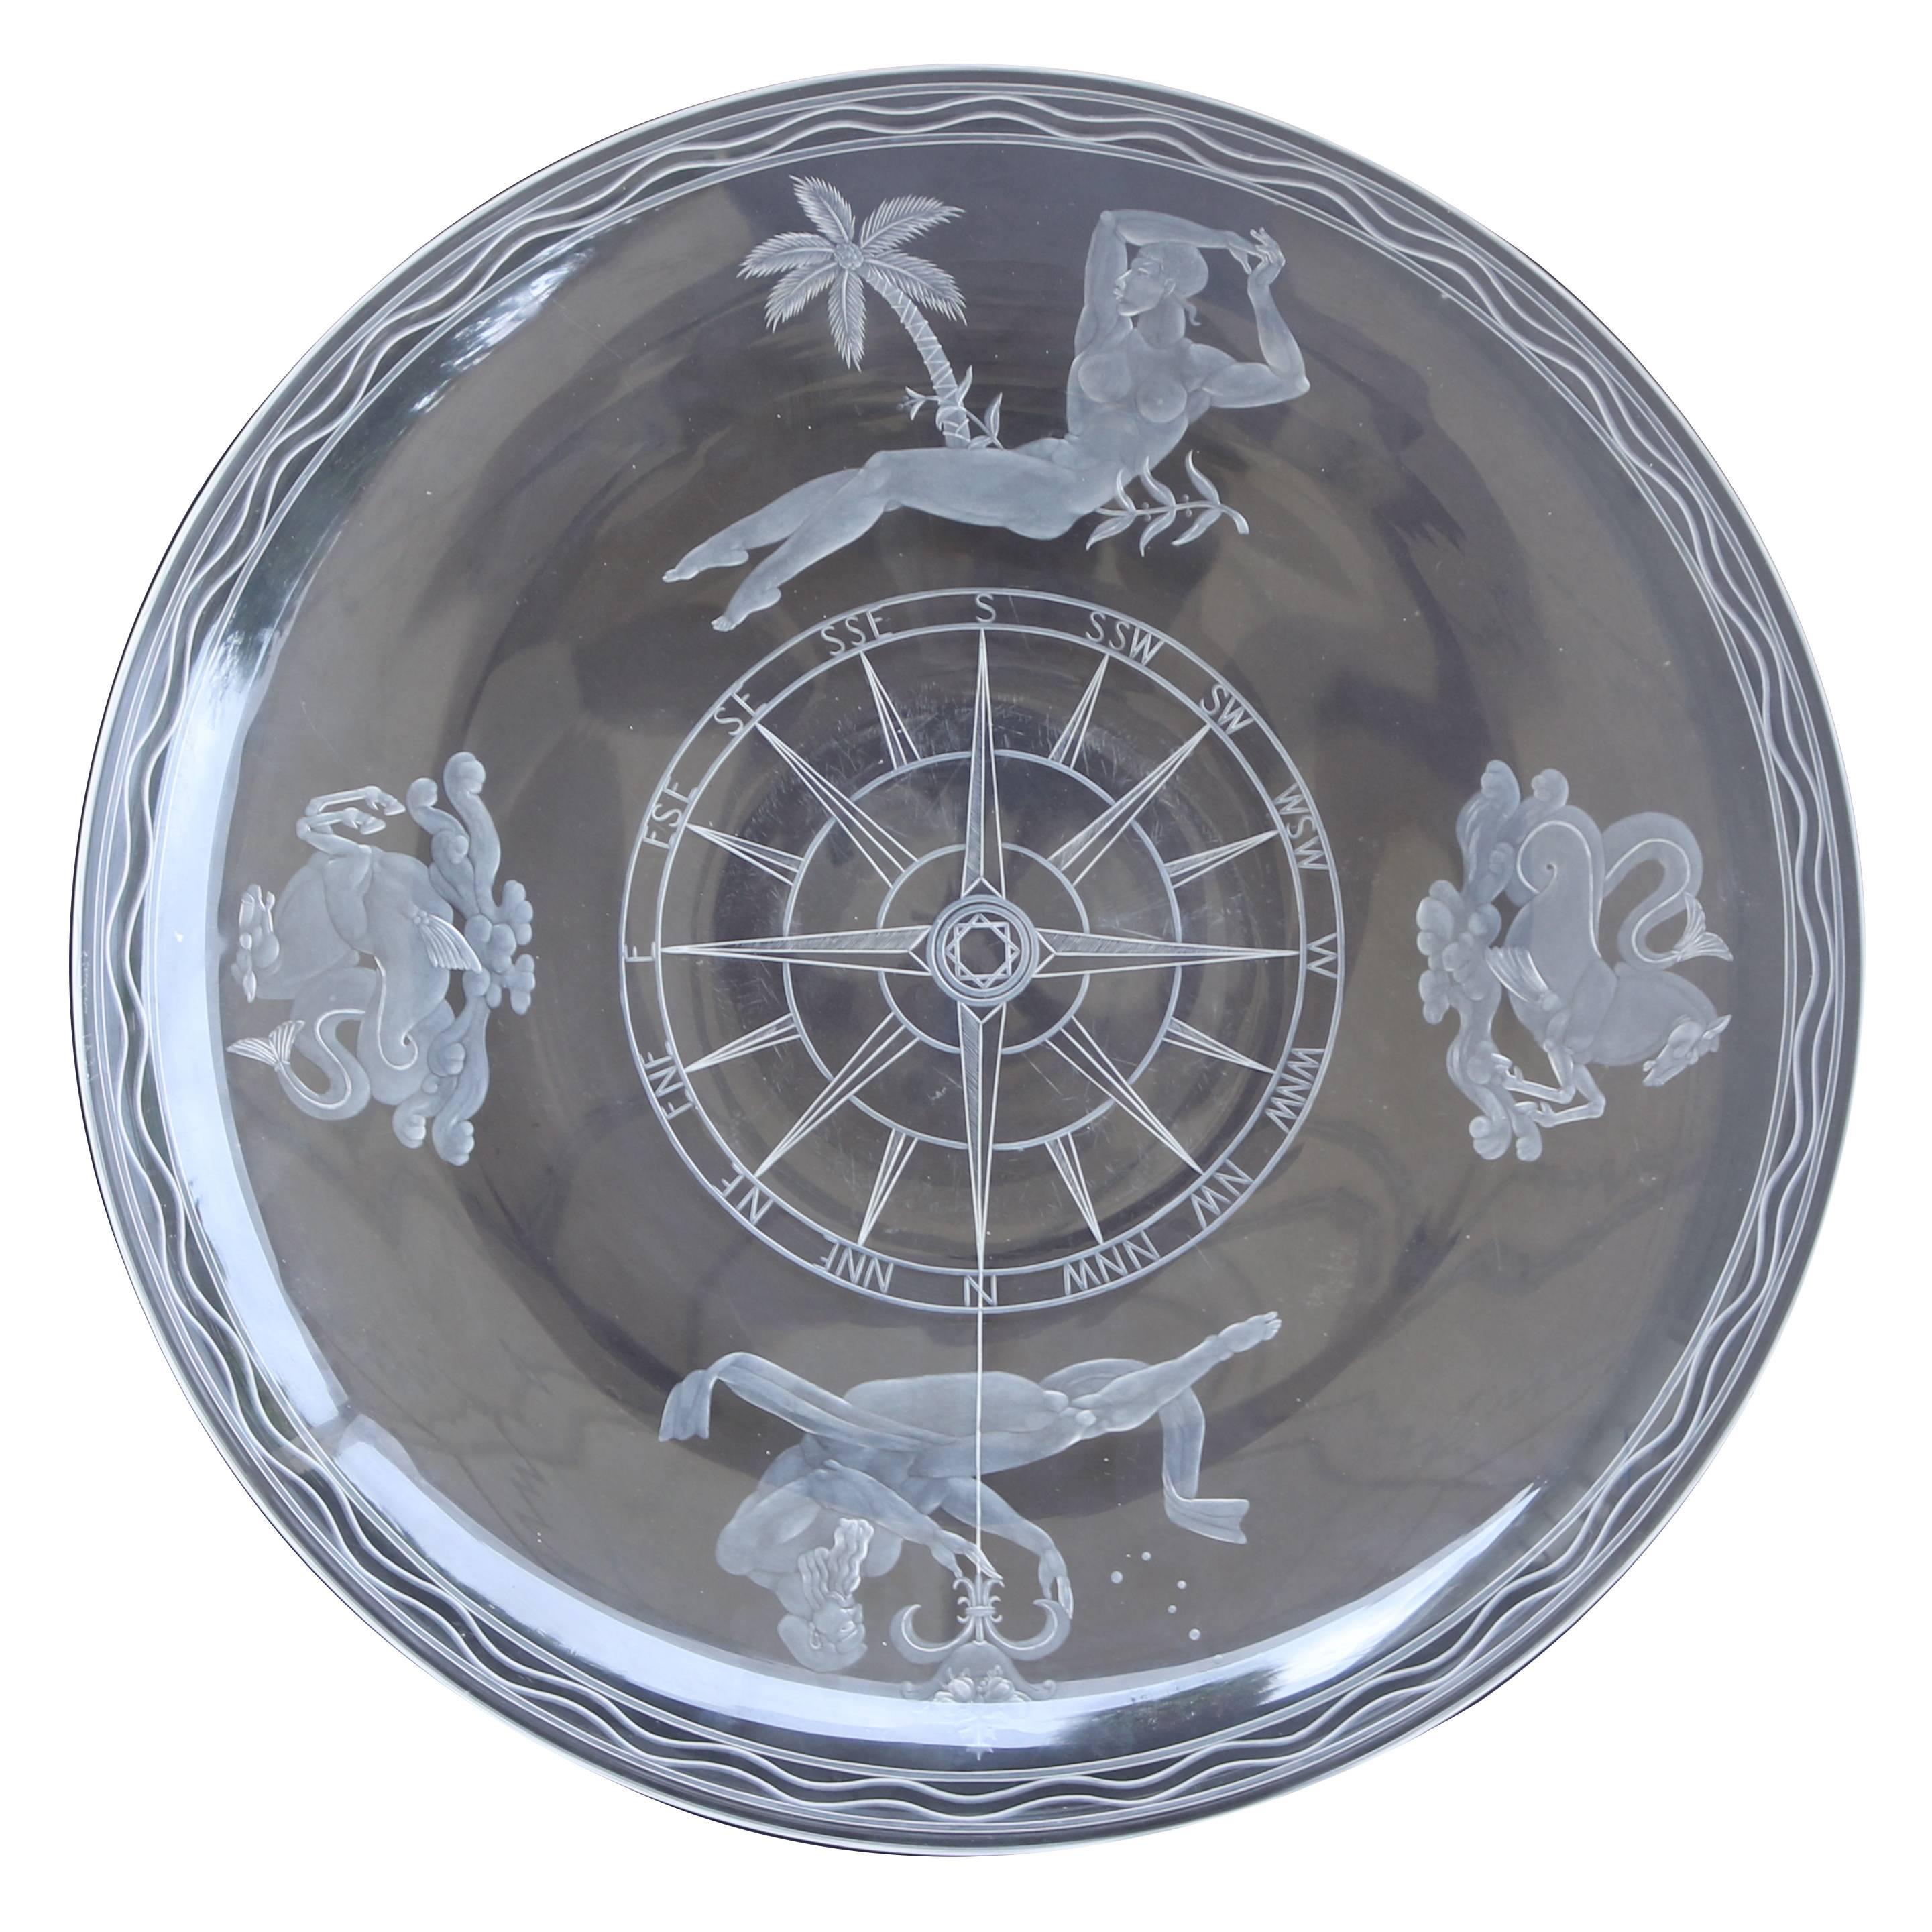 American glass created in 1937 in Corning New York by Steuben, the finest quality glass objects ever fabricated!
Own a Rare Exhibition Museum American glass piece 'Mariners Bowl' extraordinary large signed and dated 1937 Steuben mythical carved